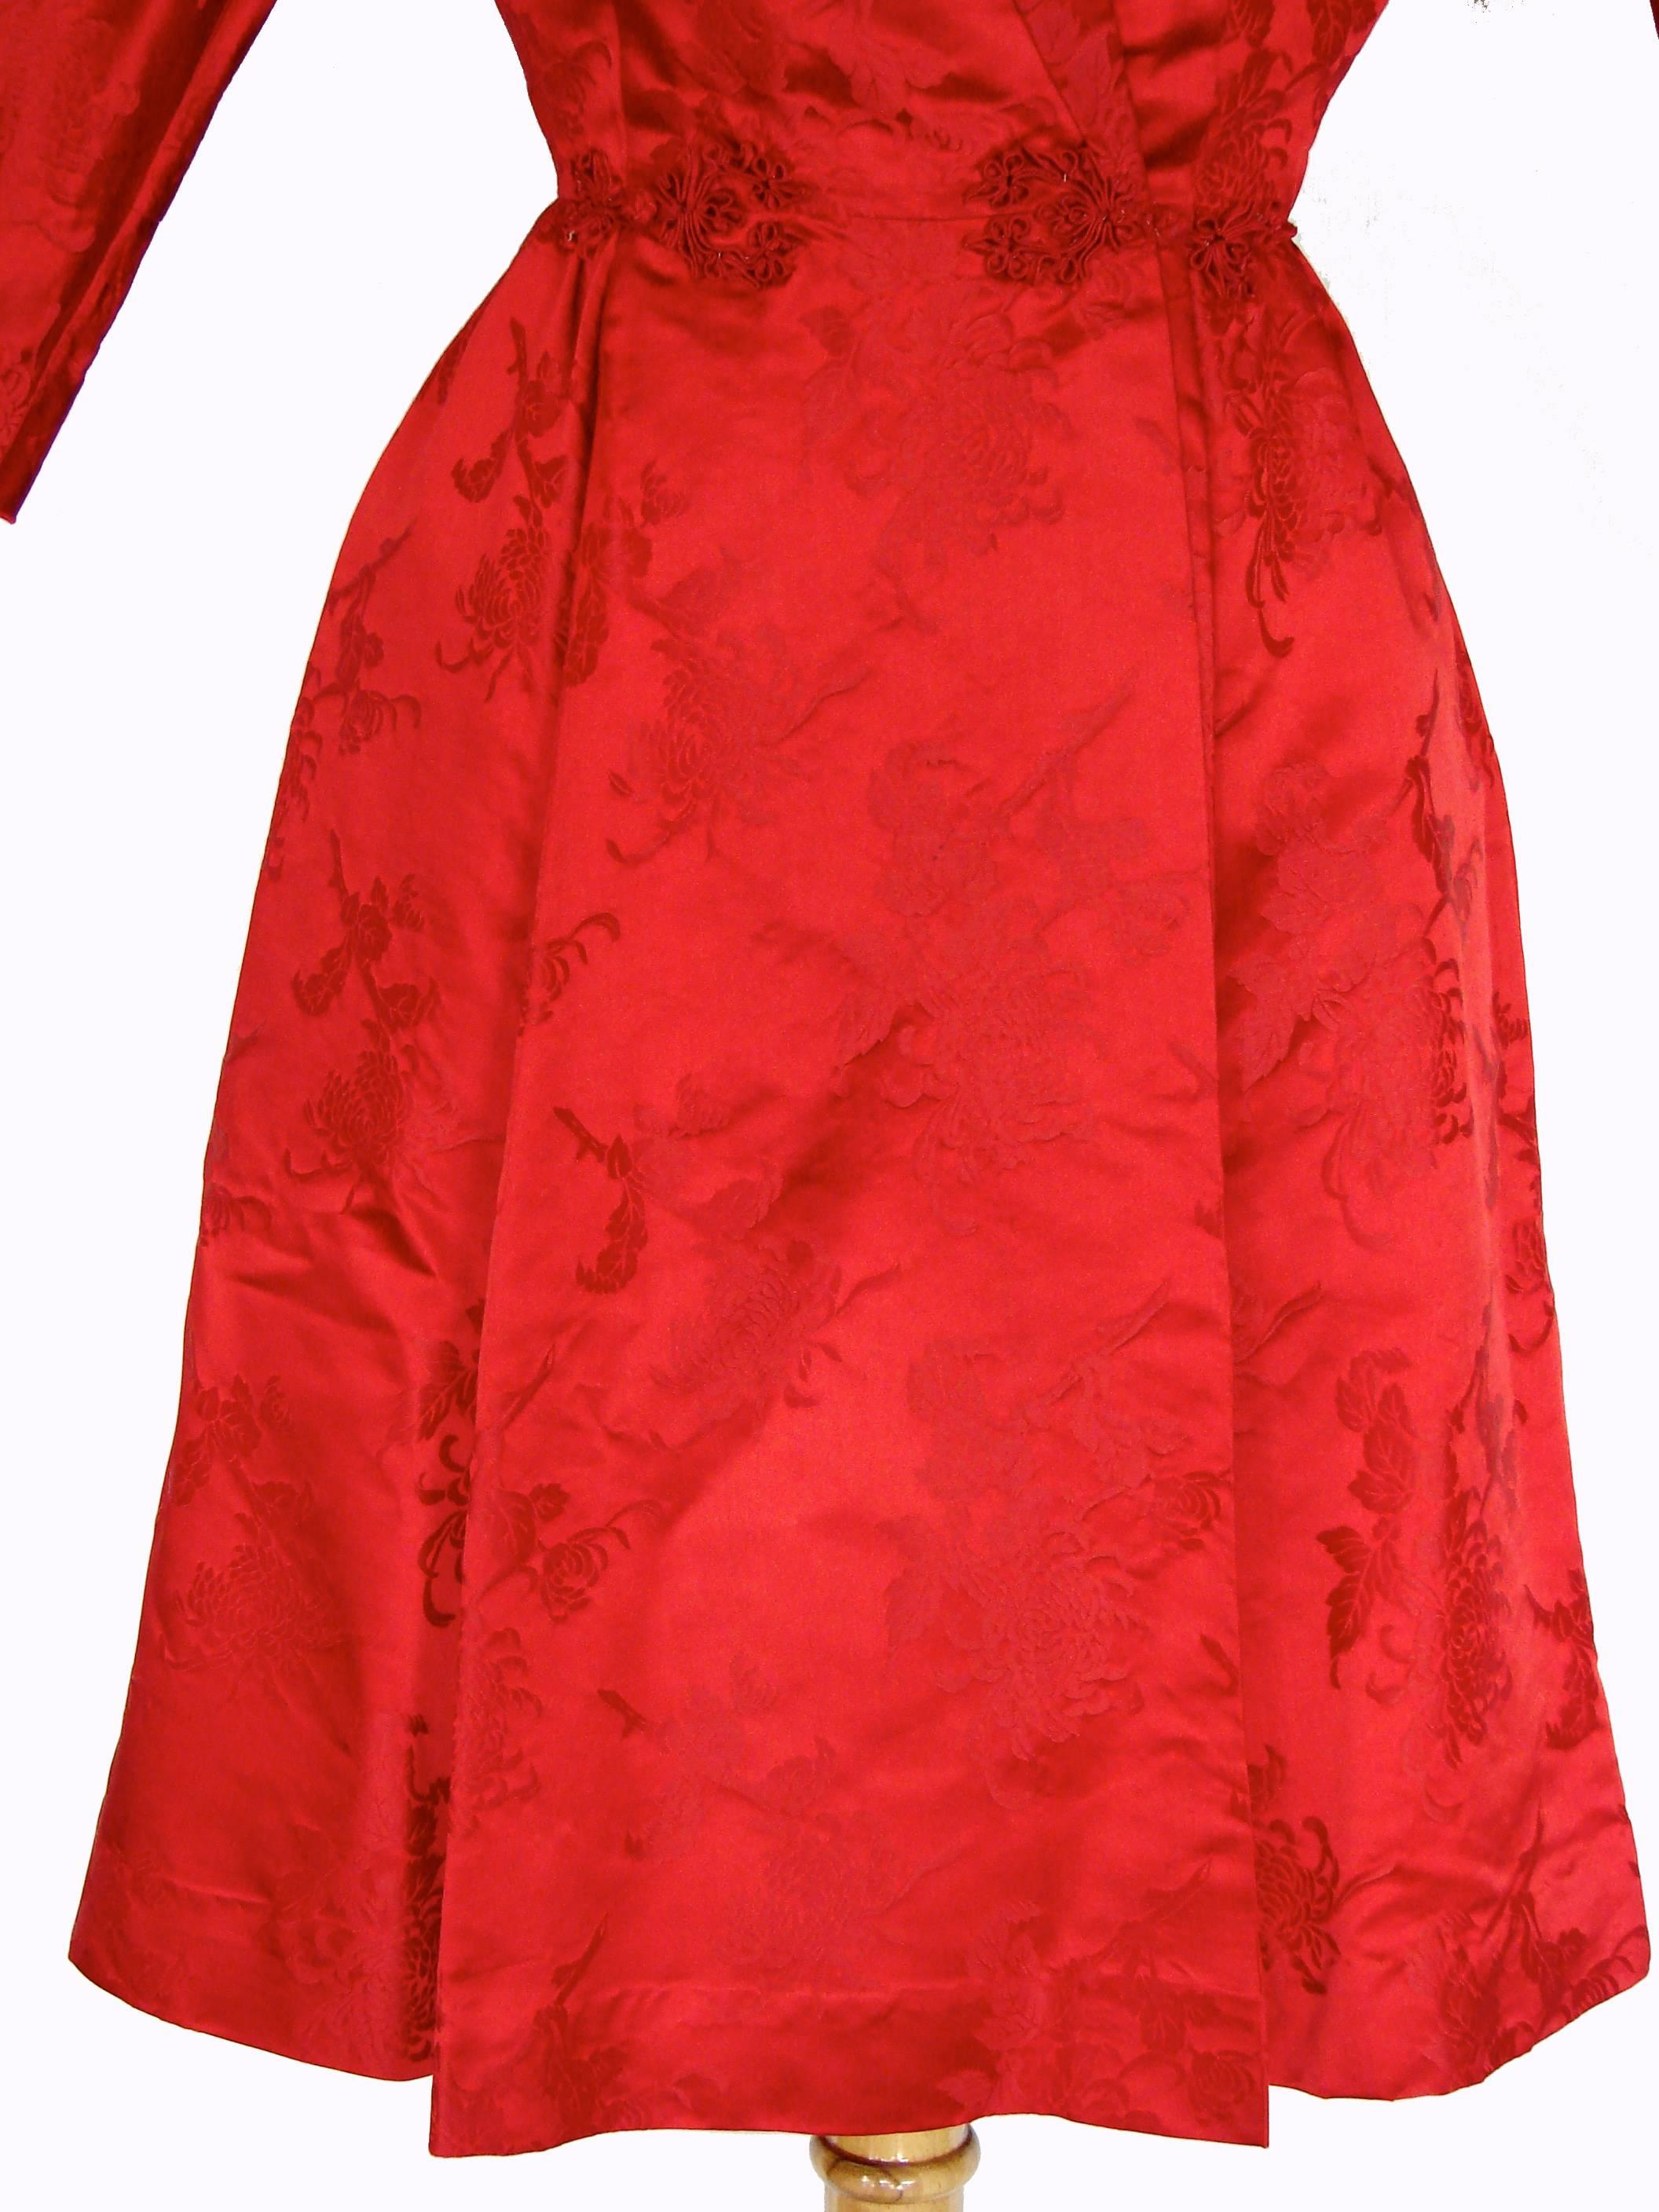 Dynasty for Lord & Taylor Vivid Red Silk Dress with Flared Skirt 1960s Size M 3